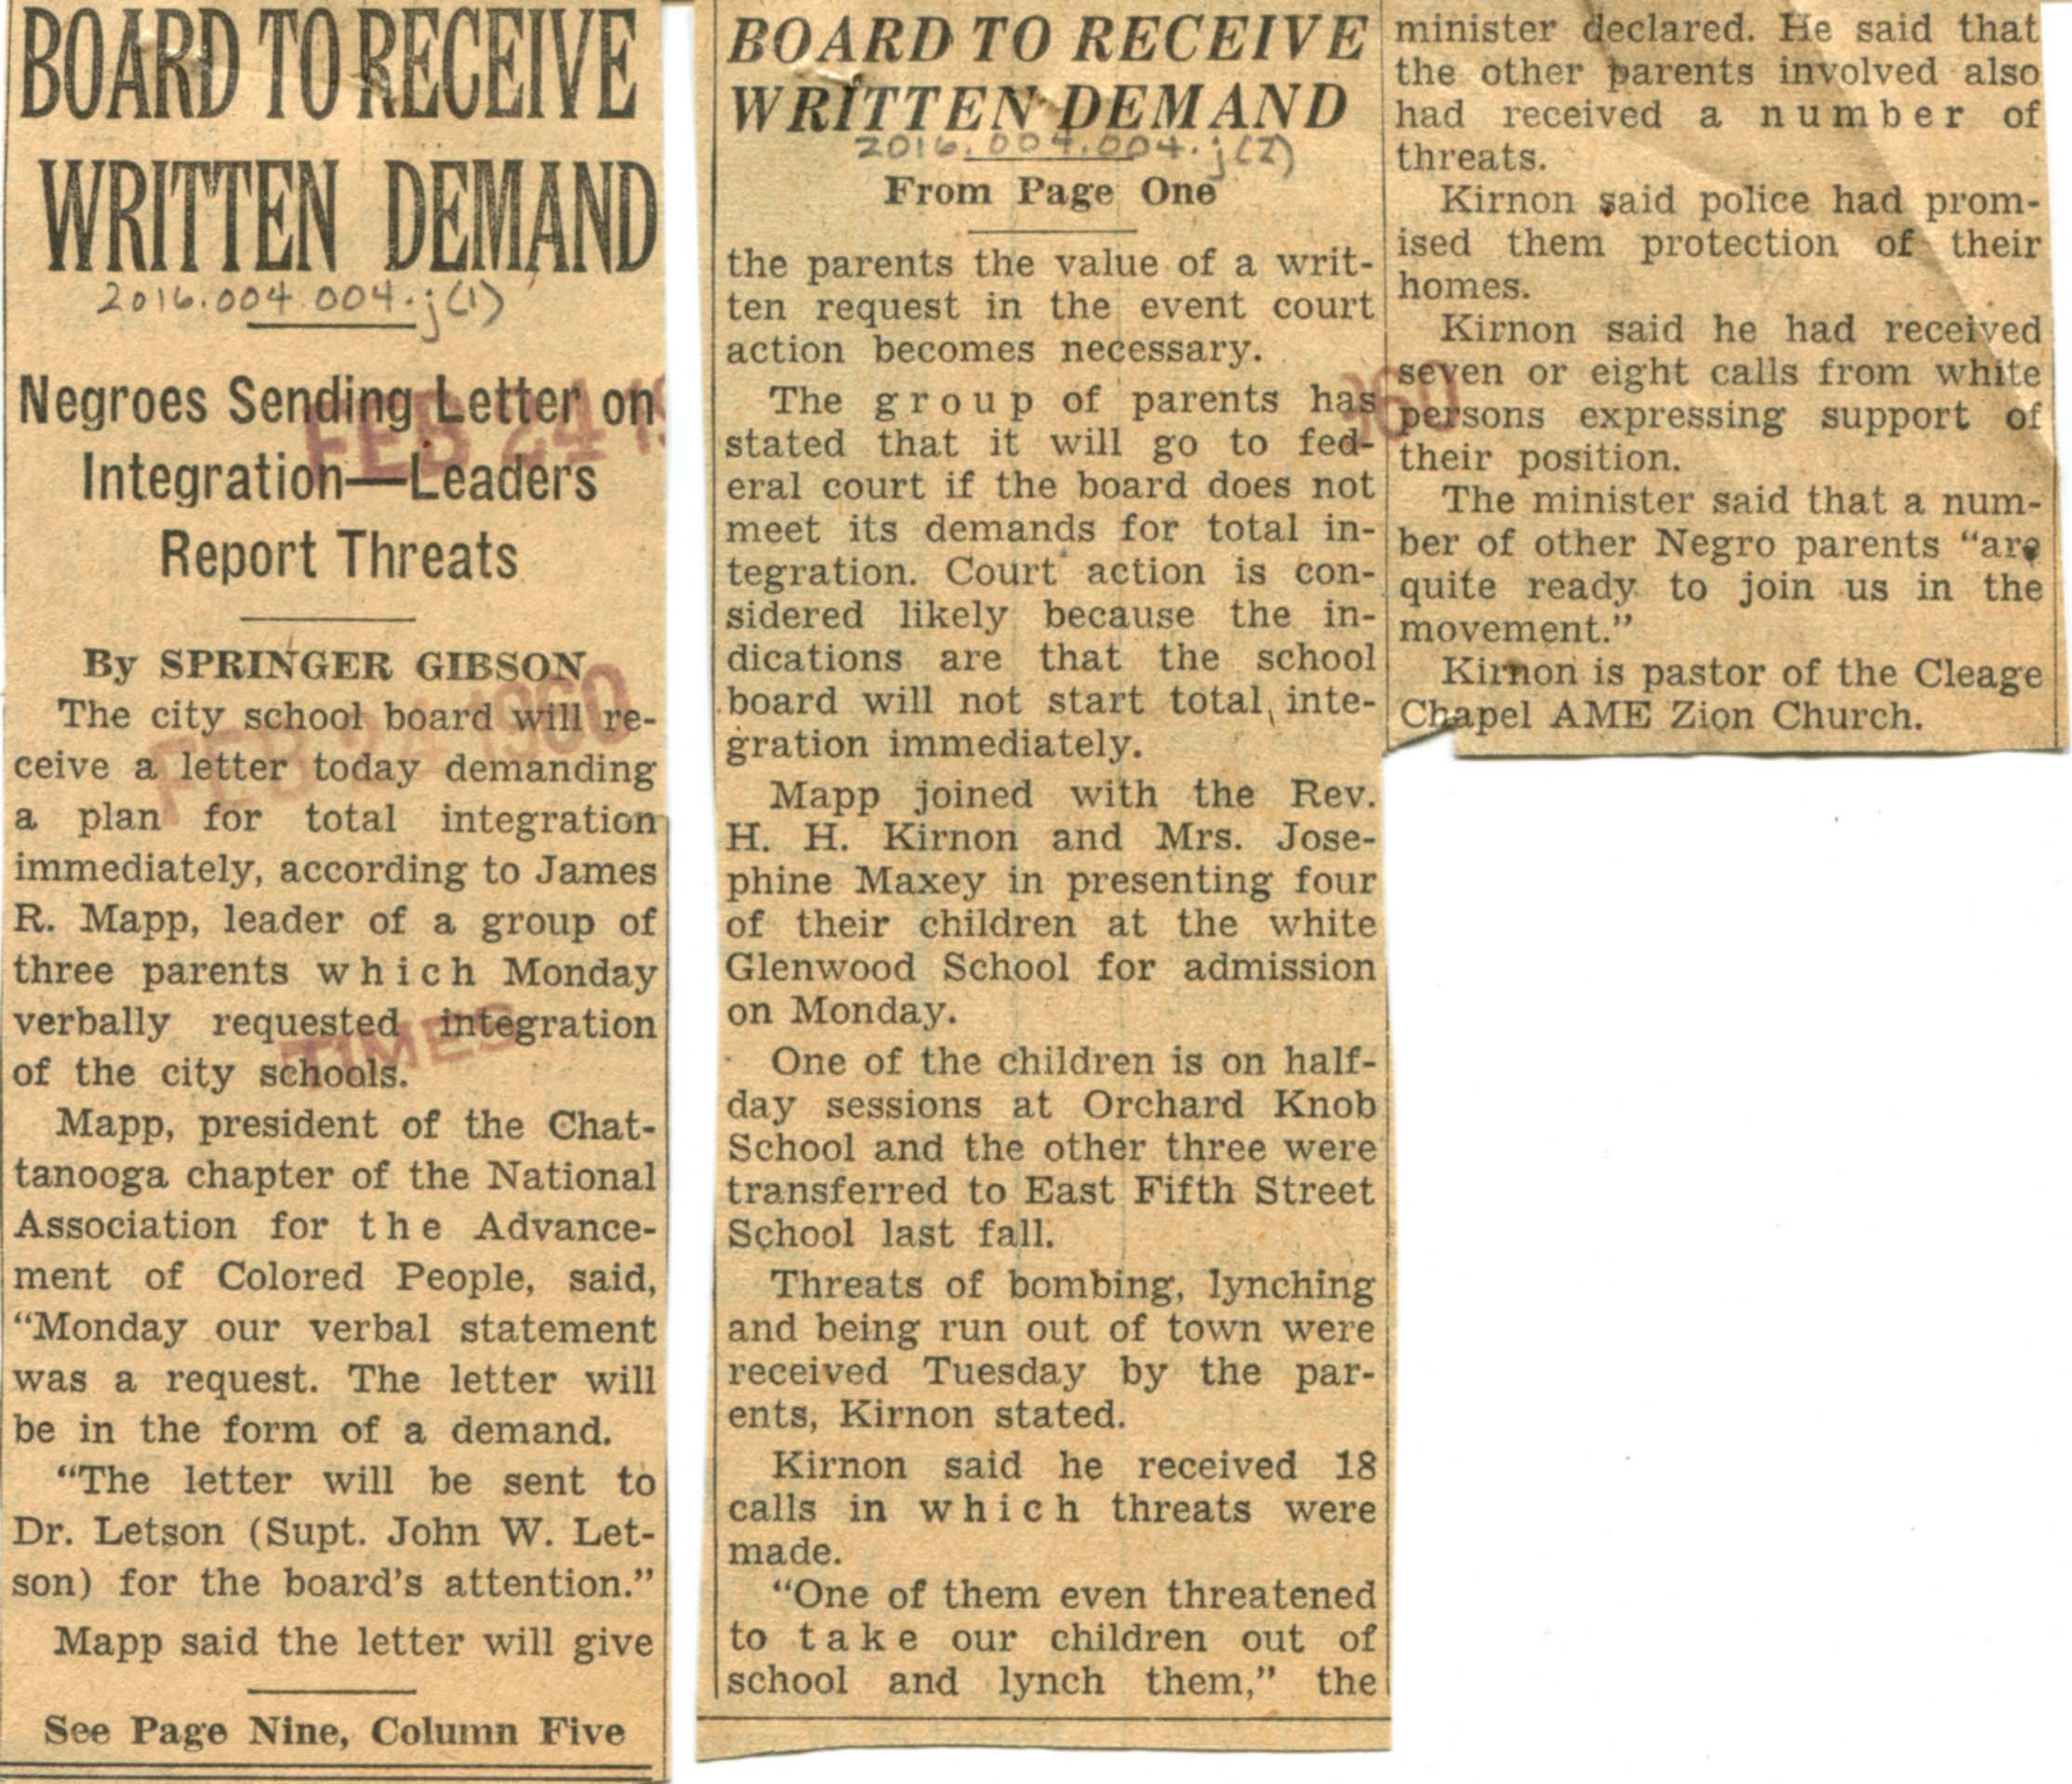 Gibson, Springer. "Board to Receive Written Demand." Chattanooga News-Free Press . February 24, 1960. 2016.004.004.j. Courtesy of the Chattanooga Public Library and University of Tennessee at Chattanooga Special Collections.